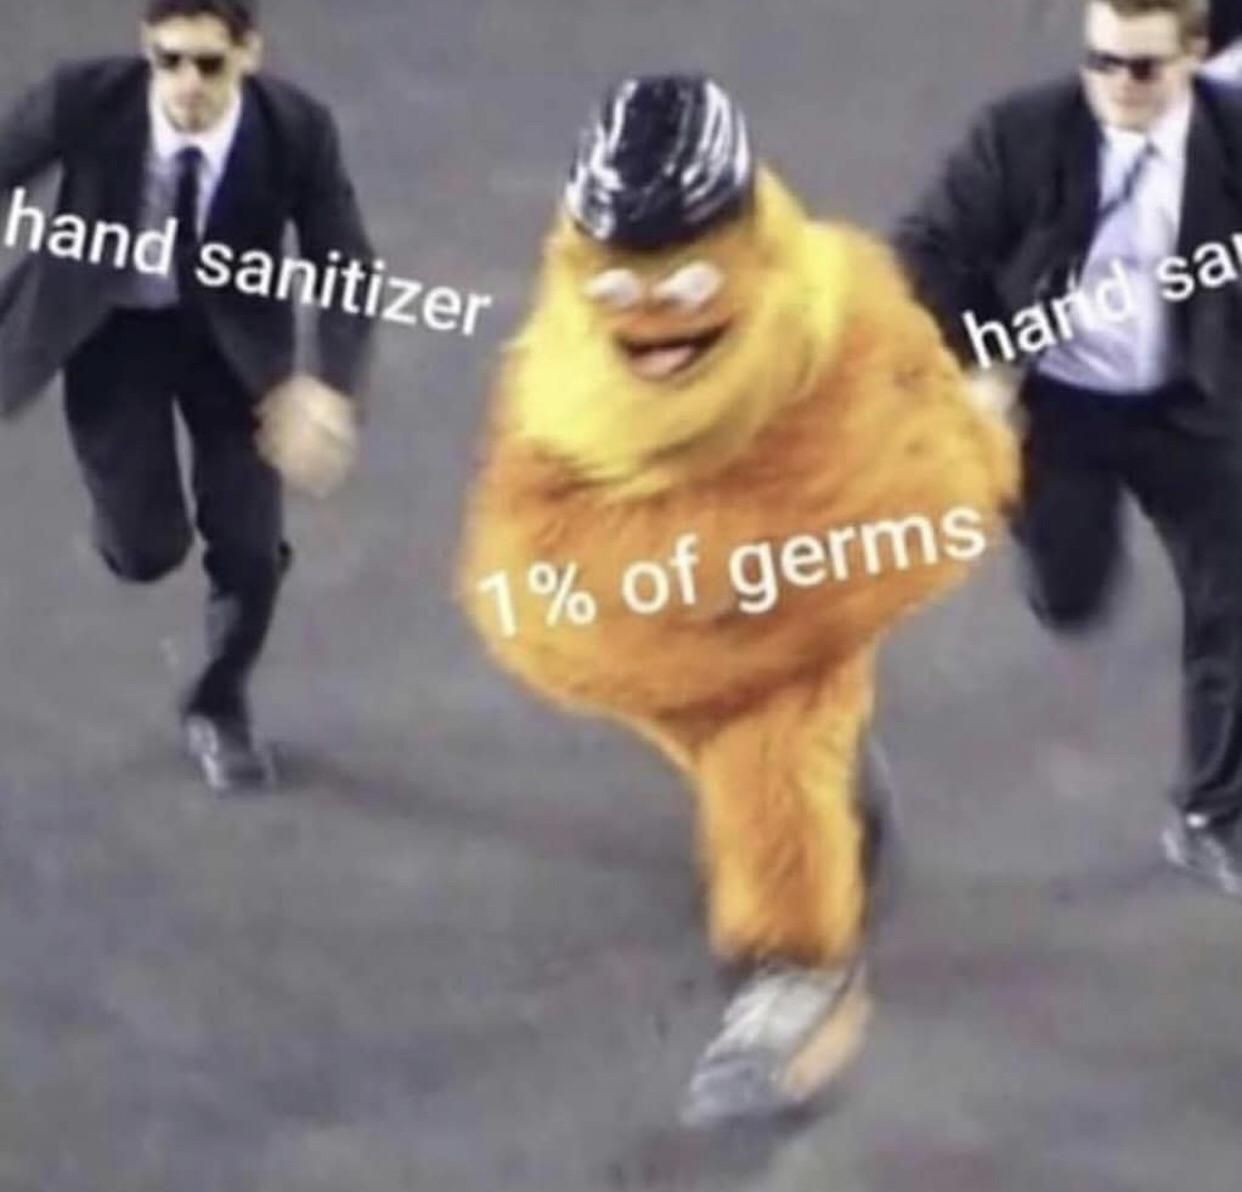 The illusive 1% of germs